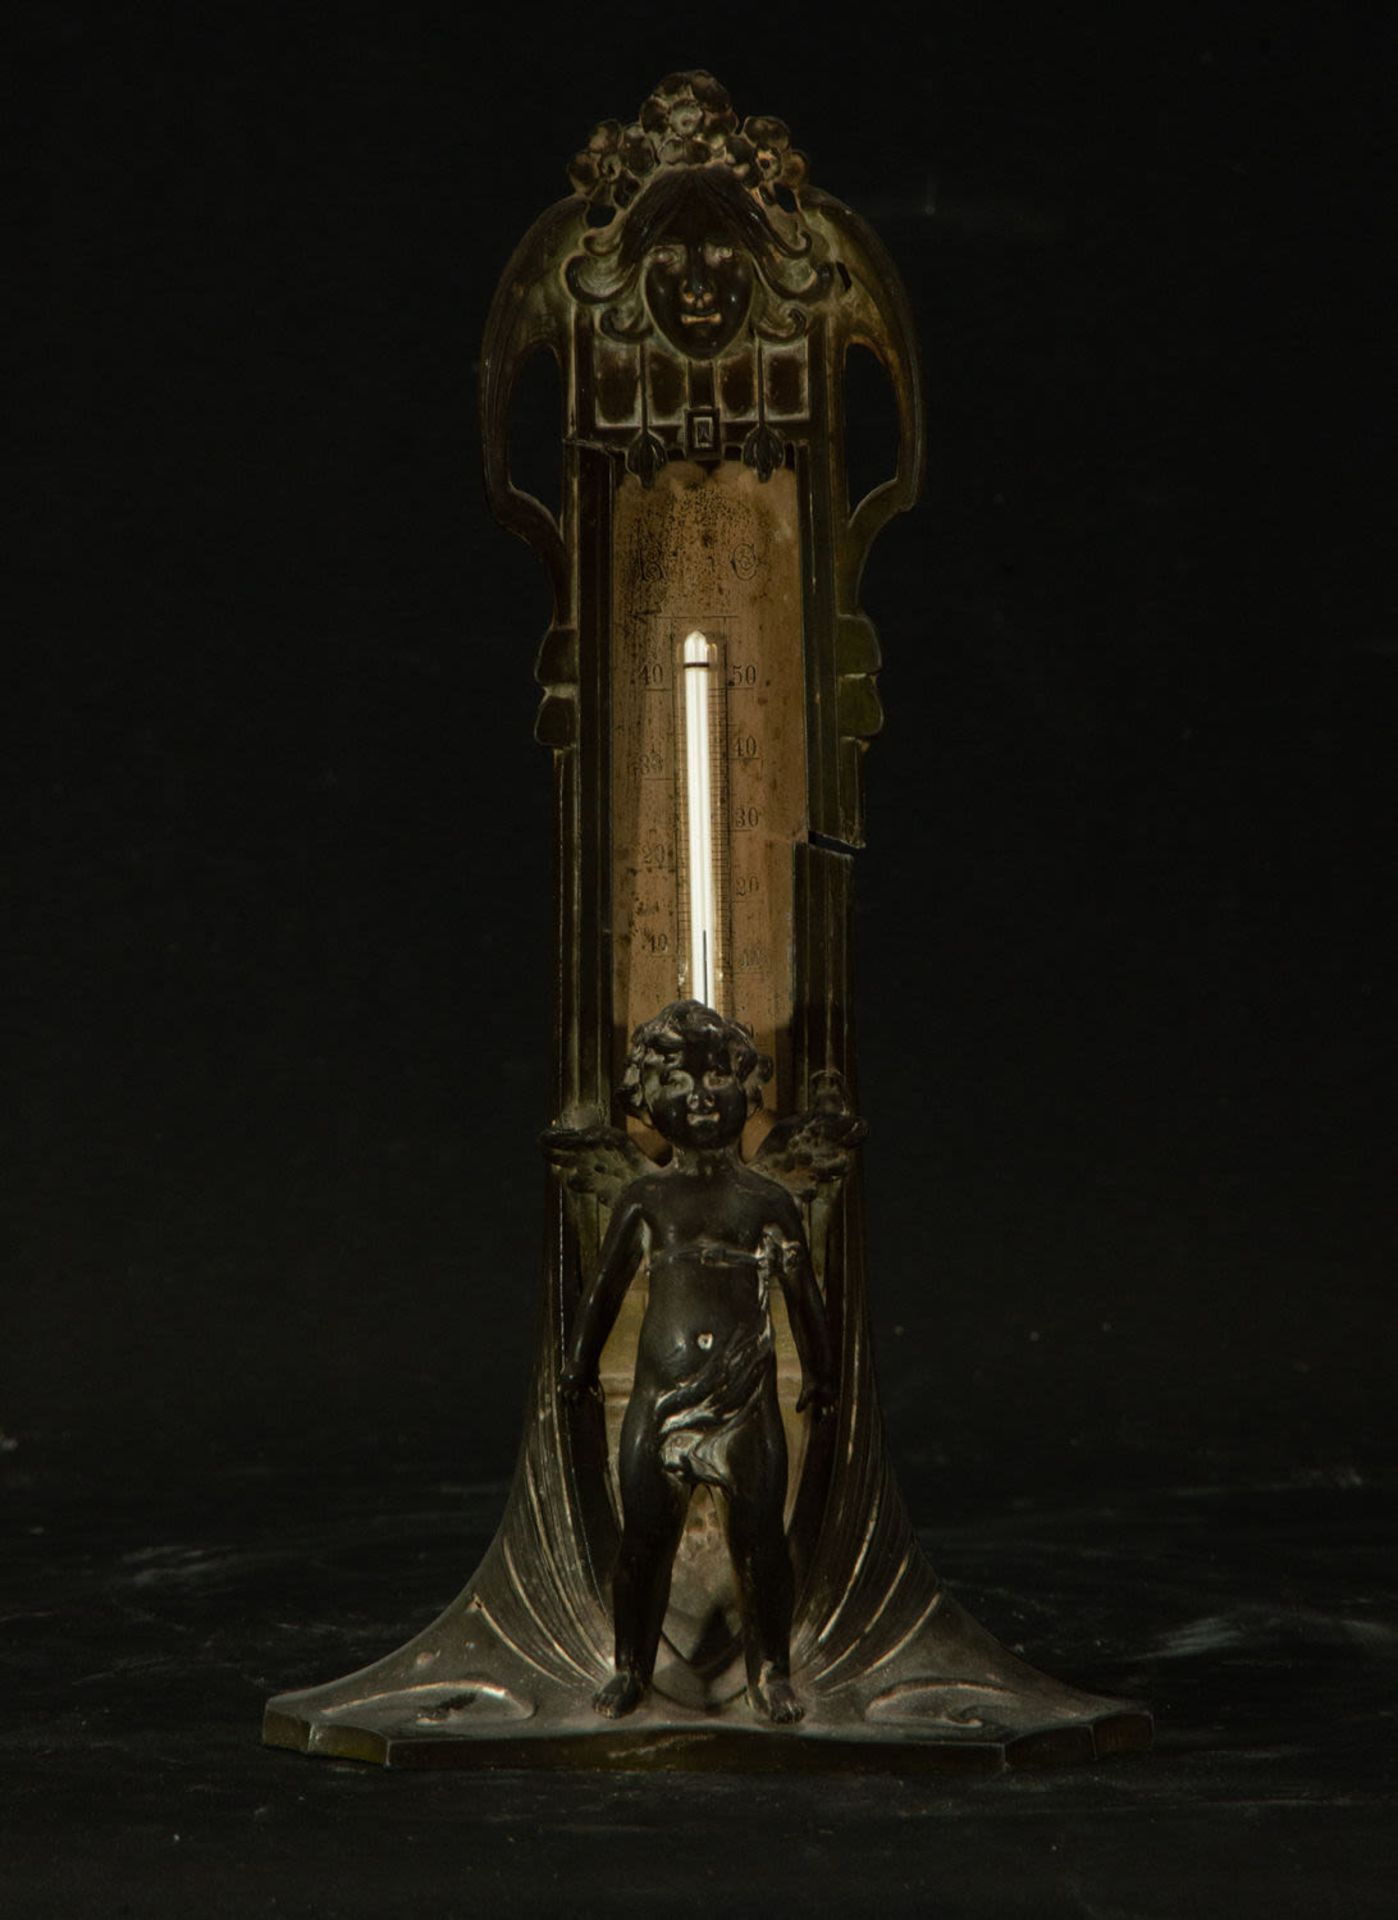 Bronze thermometer holder, 19th century French work